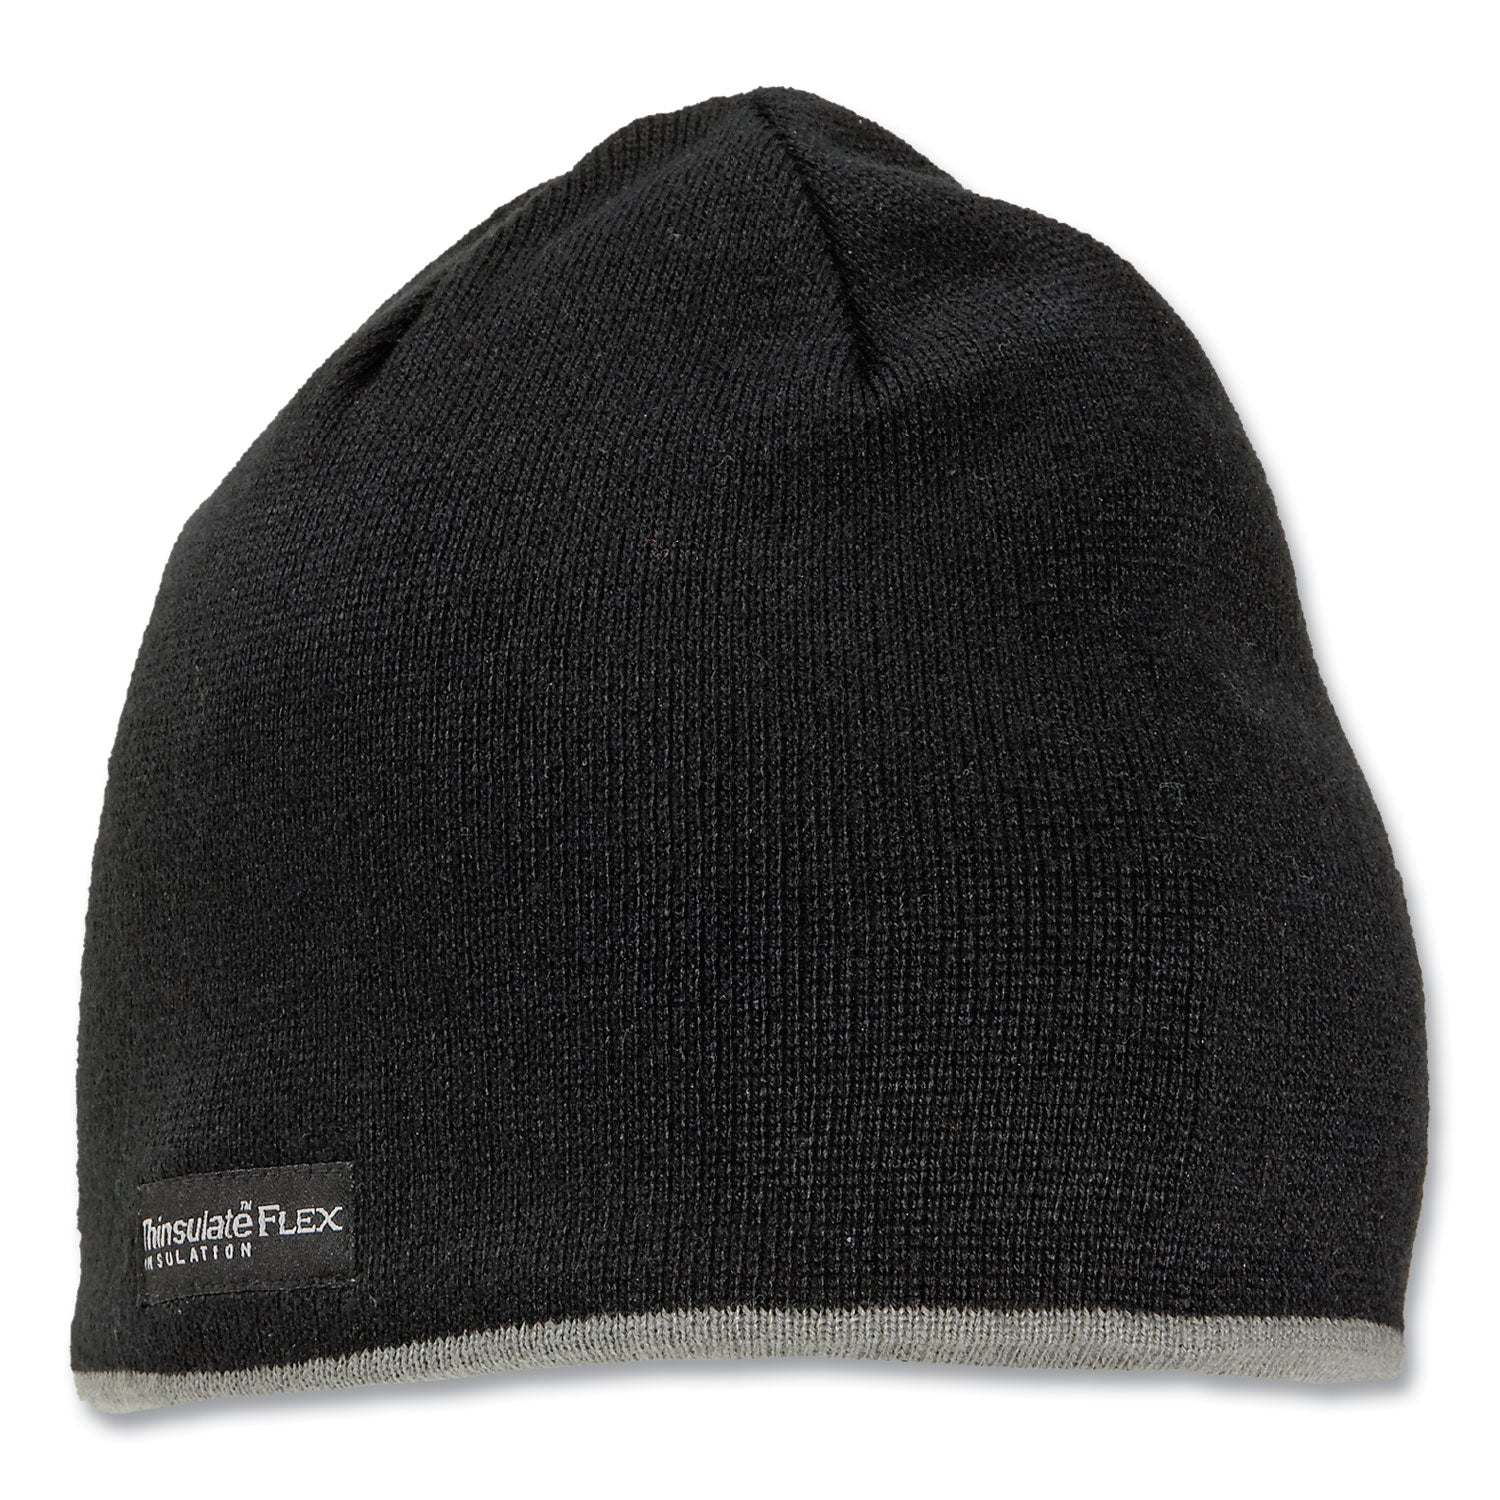 n-ferno-6818-knit-winter-hat-fleece-lined-one-size-fits-most-black-ships-in-1-3-business-days_ego16818 - 1